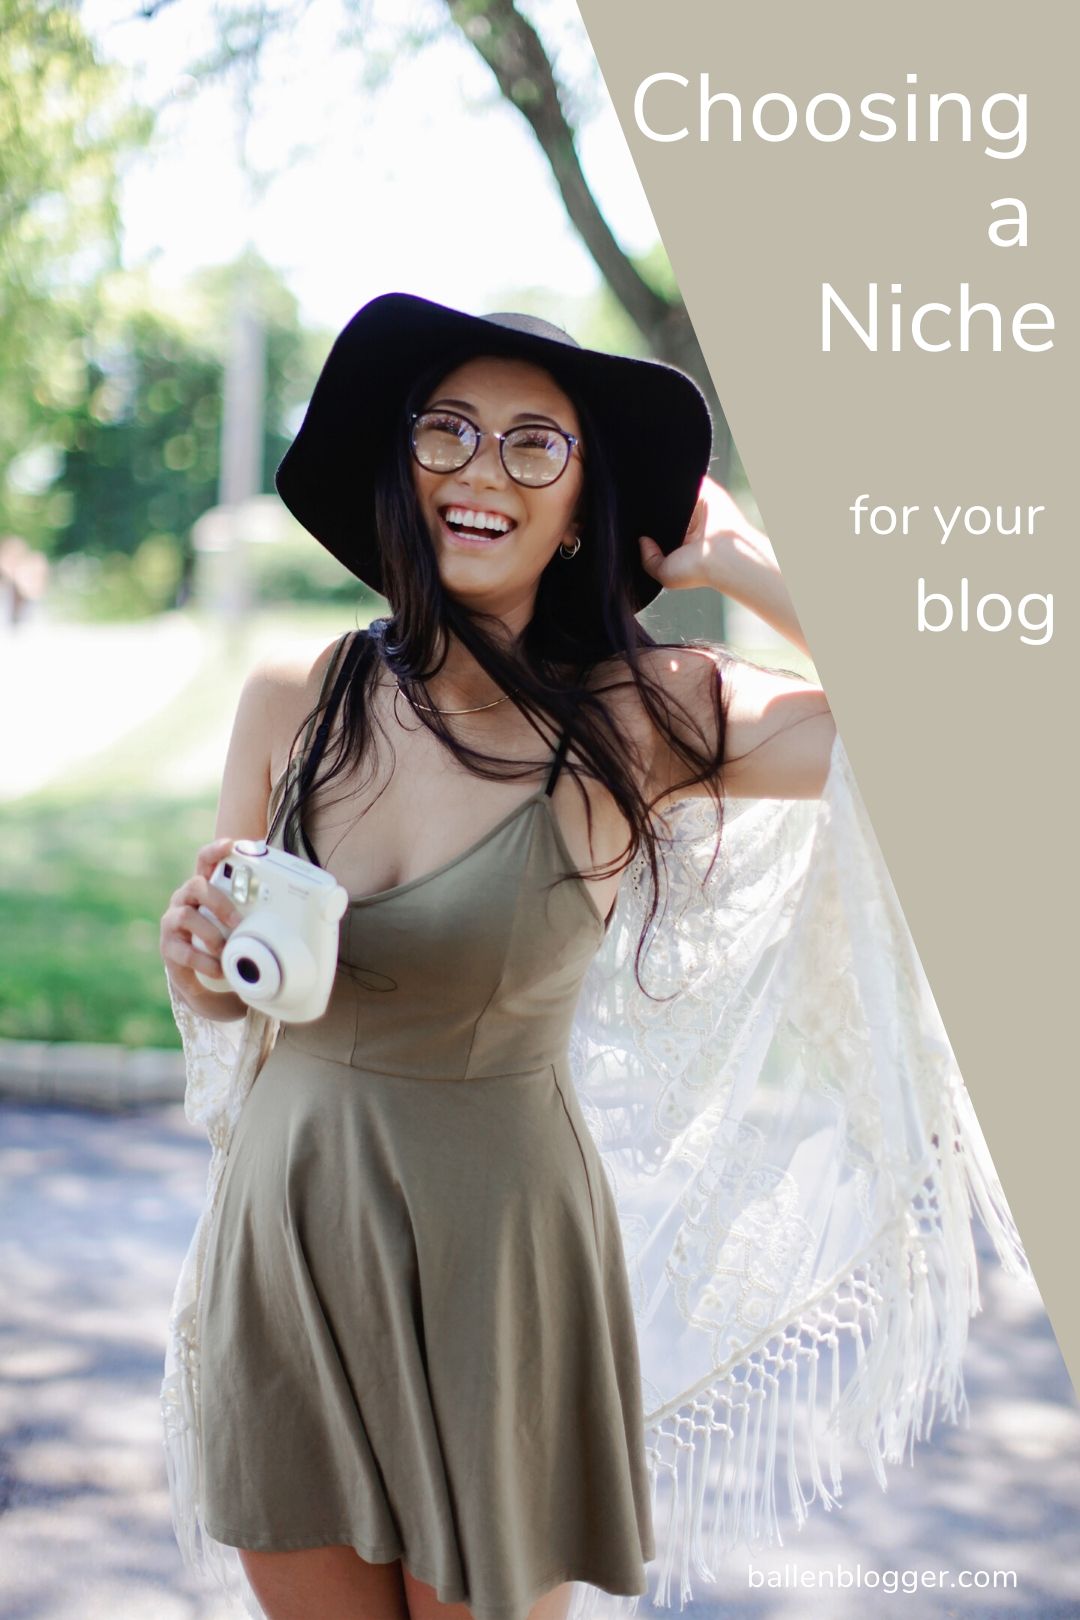 There's a girl in a tan summer dress and hat who could be traveling and is holding a coffee mug smiling next to the words how to choose a blog niche list